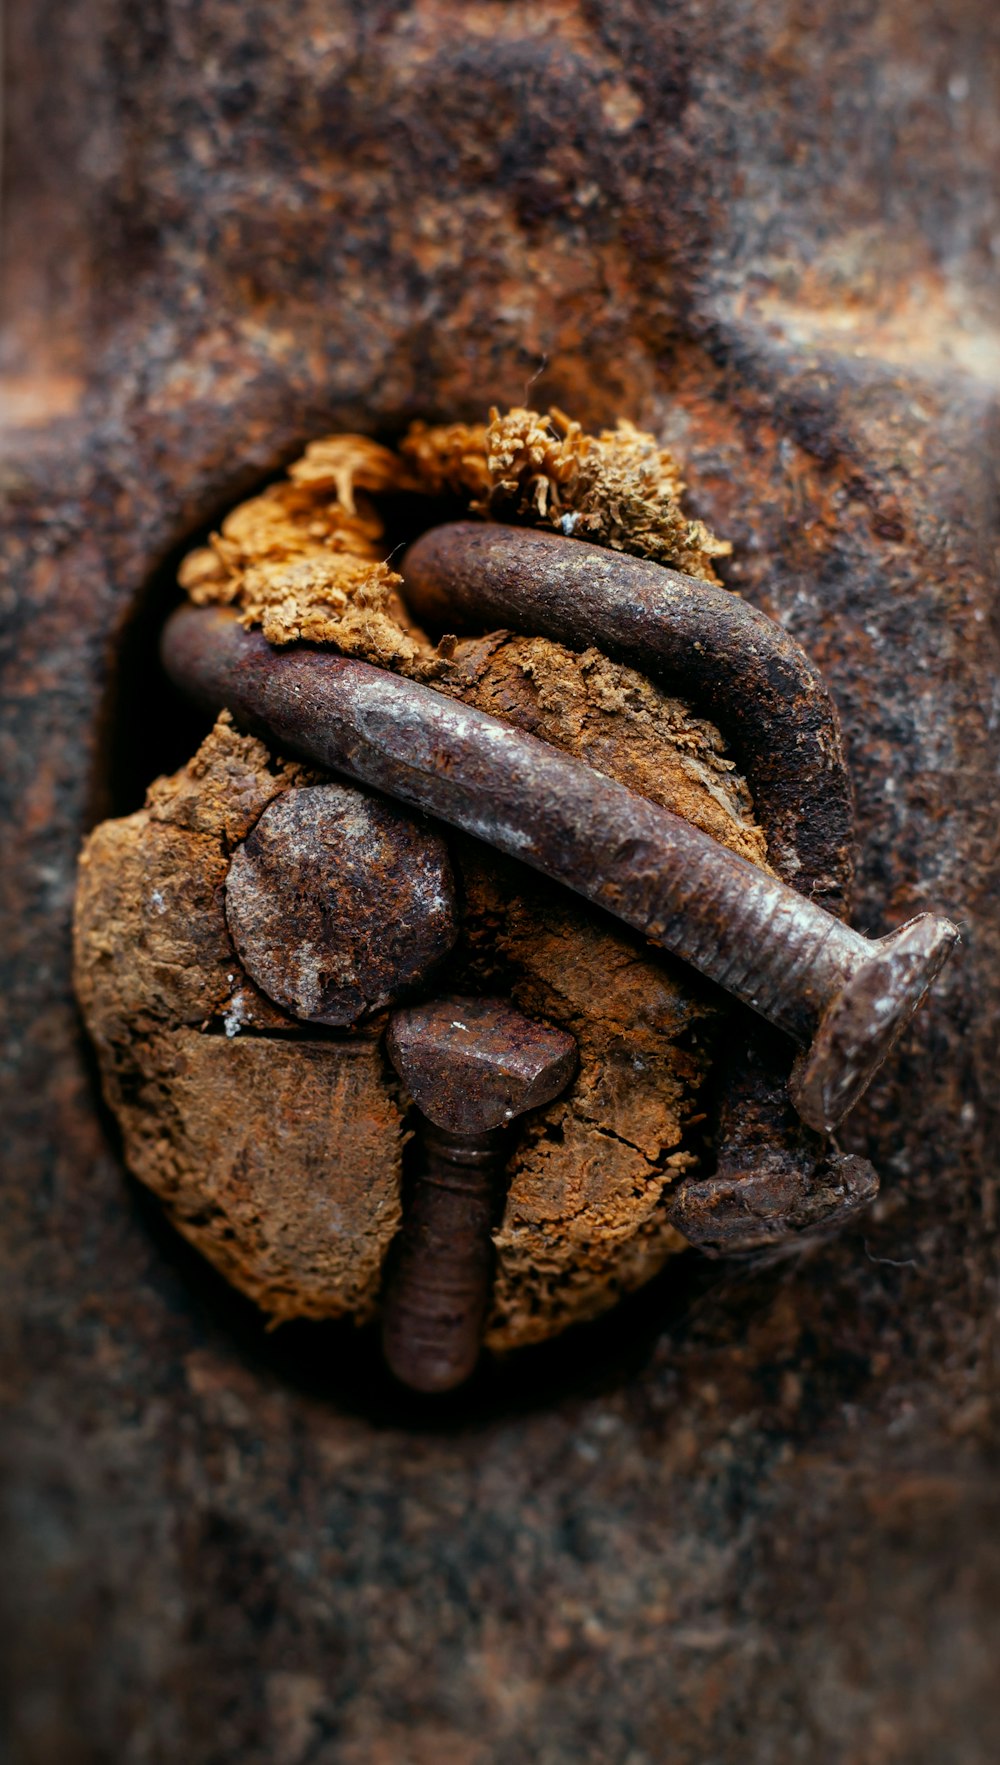 a rusted metal surface with a rusty screwdriver